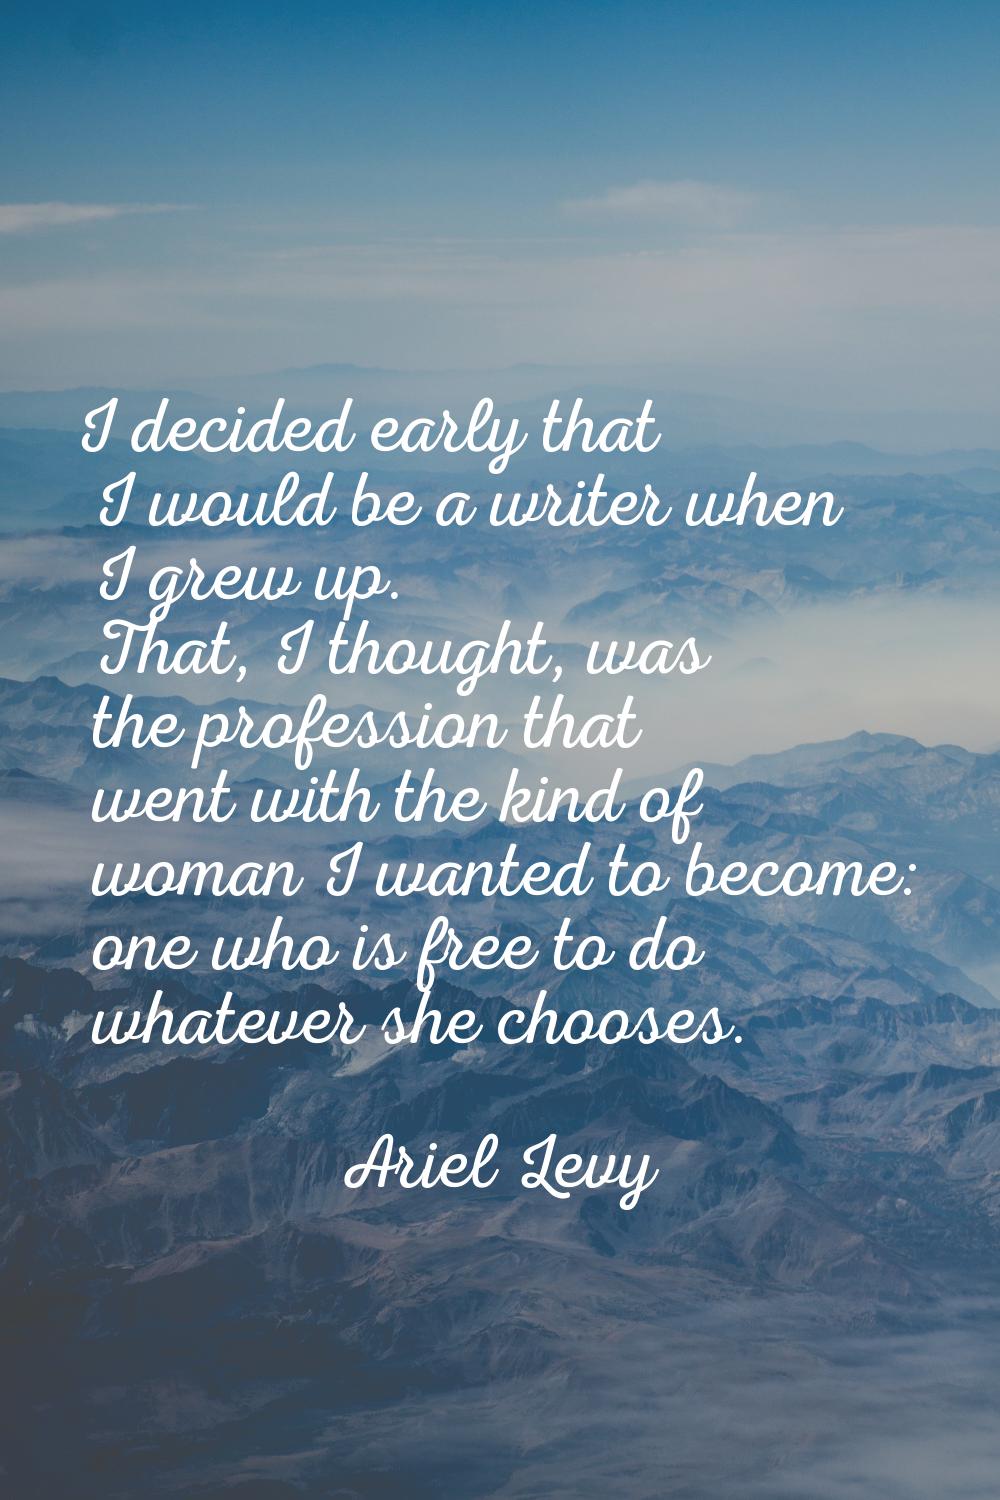 I decided early that I would be a writer when I grew up. That, I thought, was the profession that w